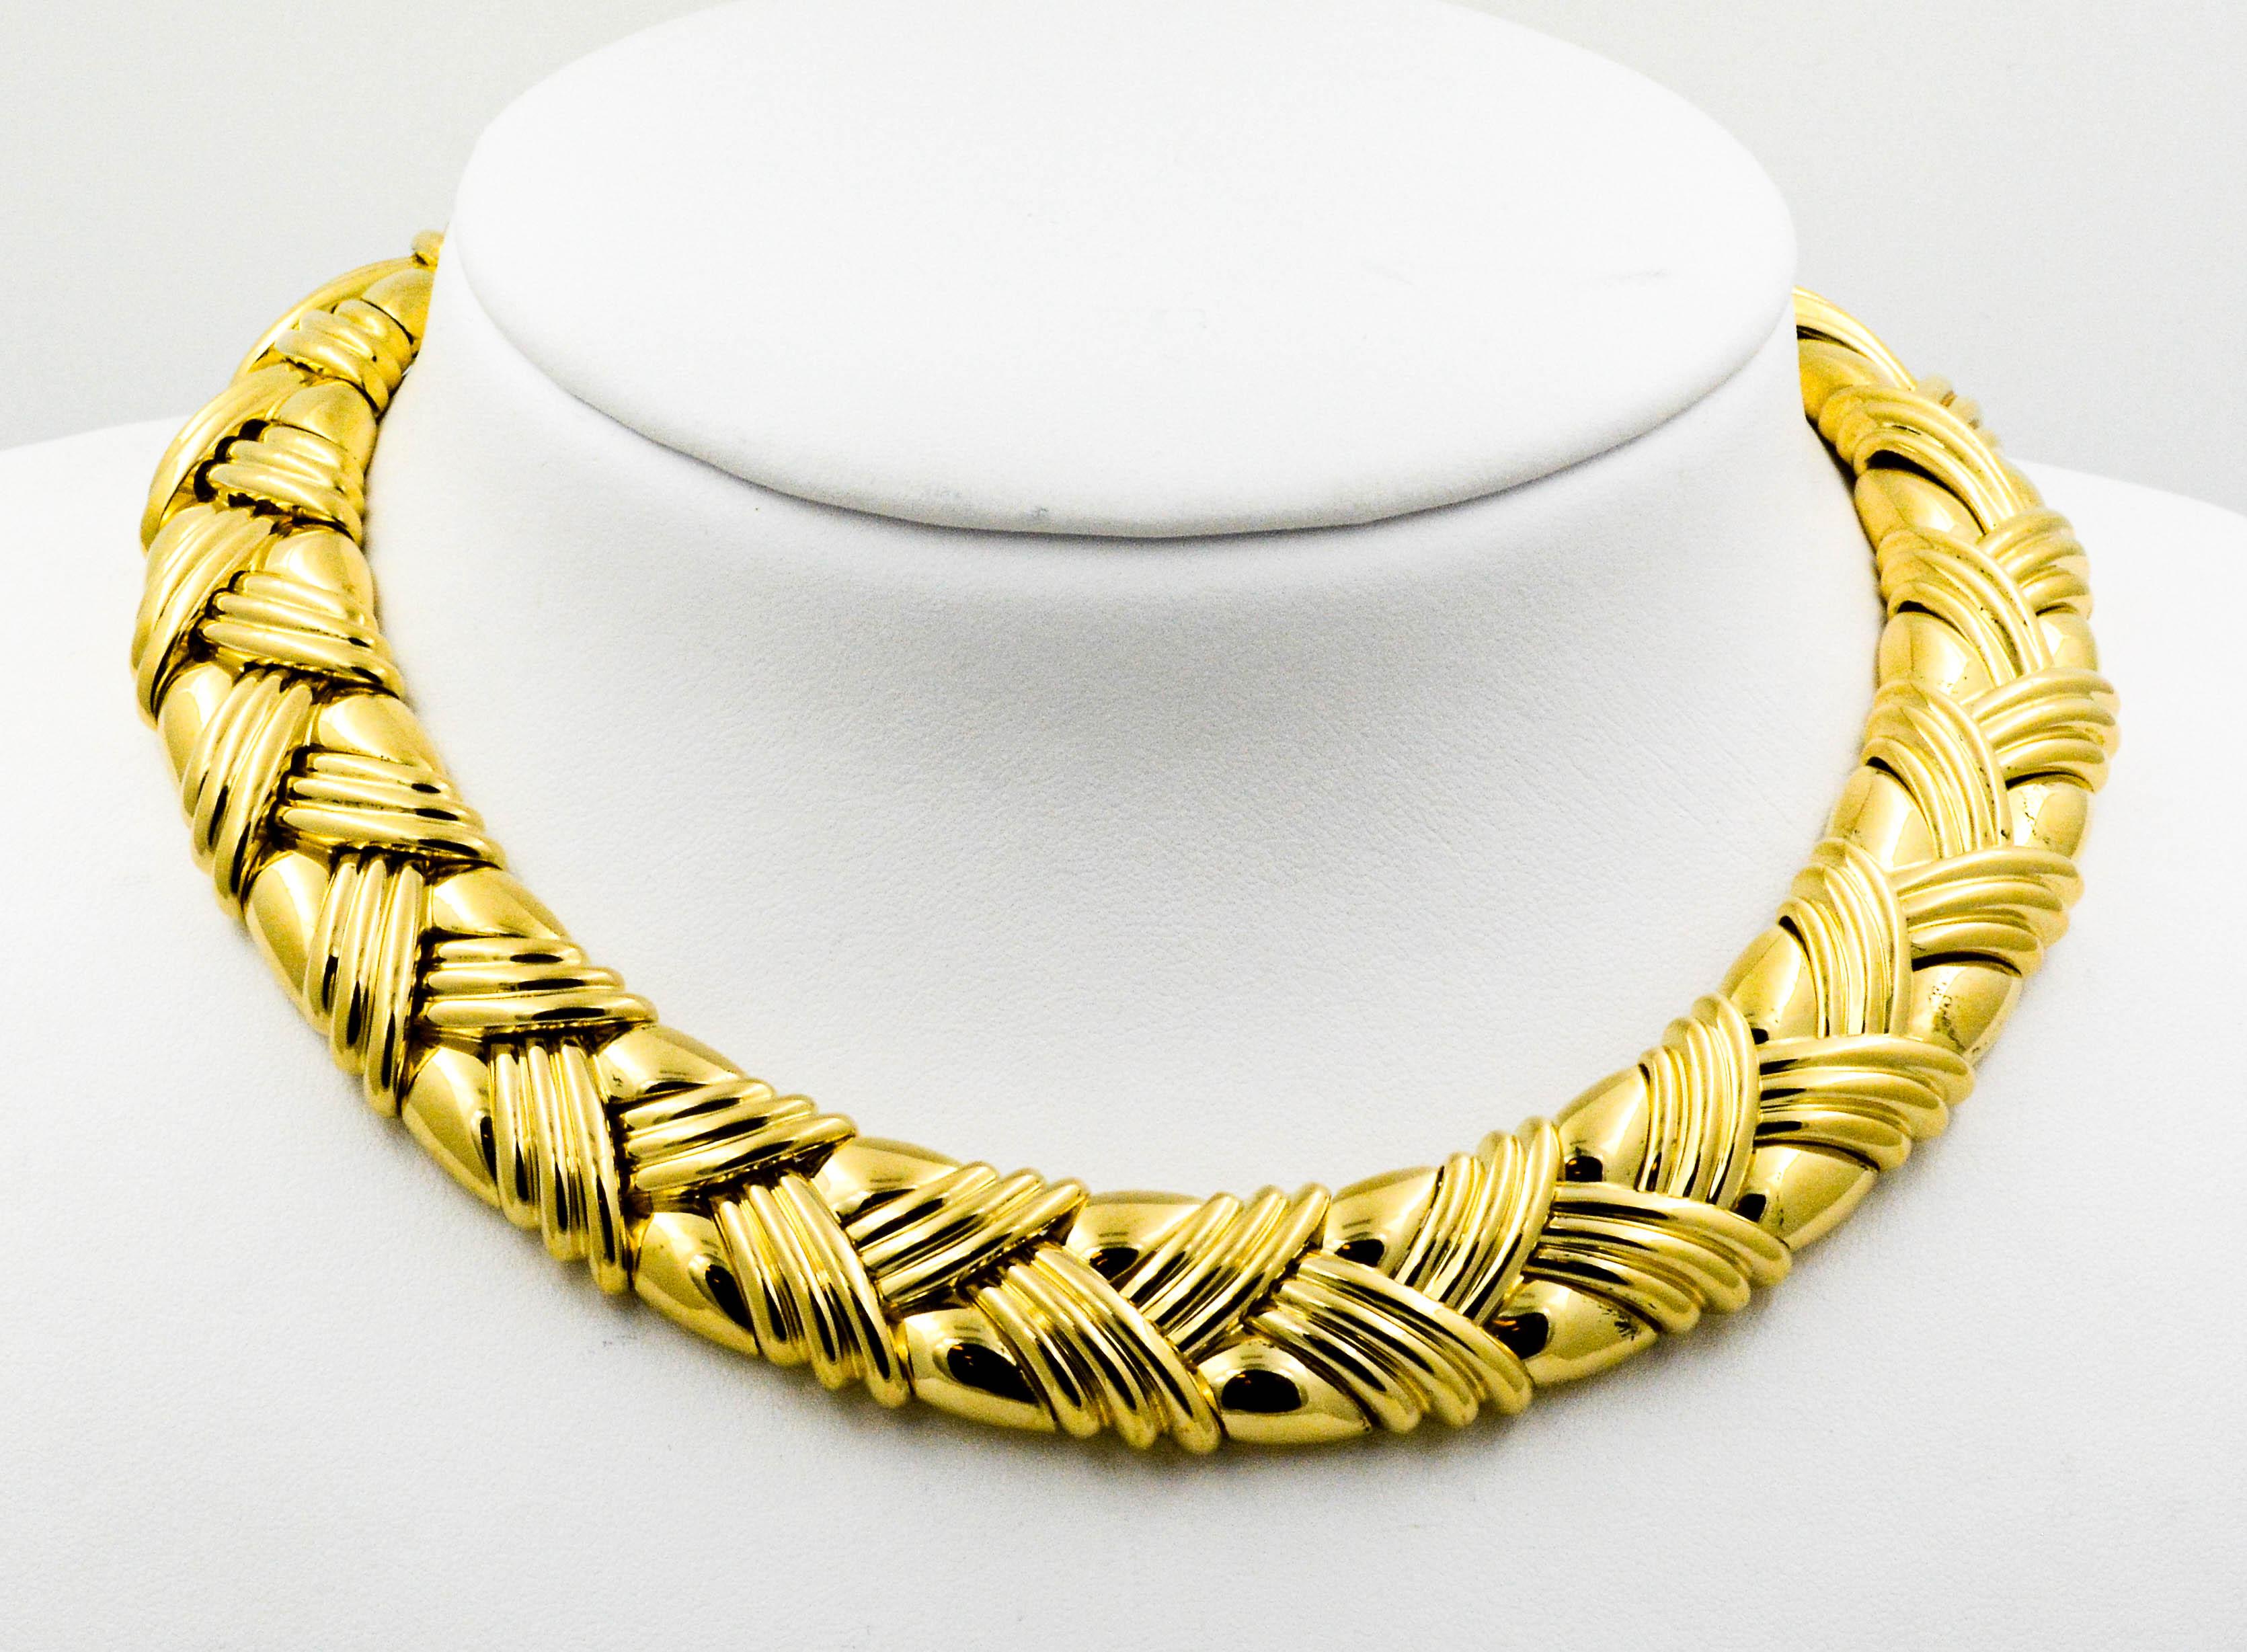 Circa 1980's 18 Karat Yellow Gold 16 inch Basket Weave Collar Necklace in excellent condition. 18 mm wide with an integrated clasp.